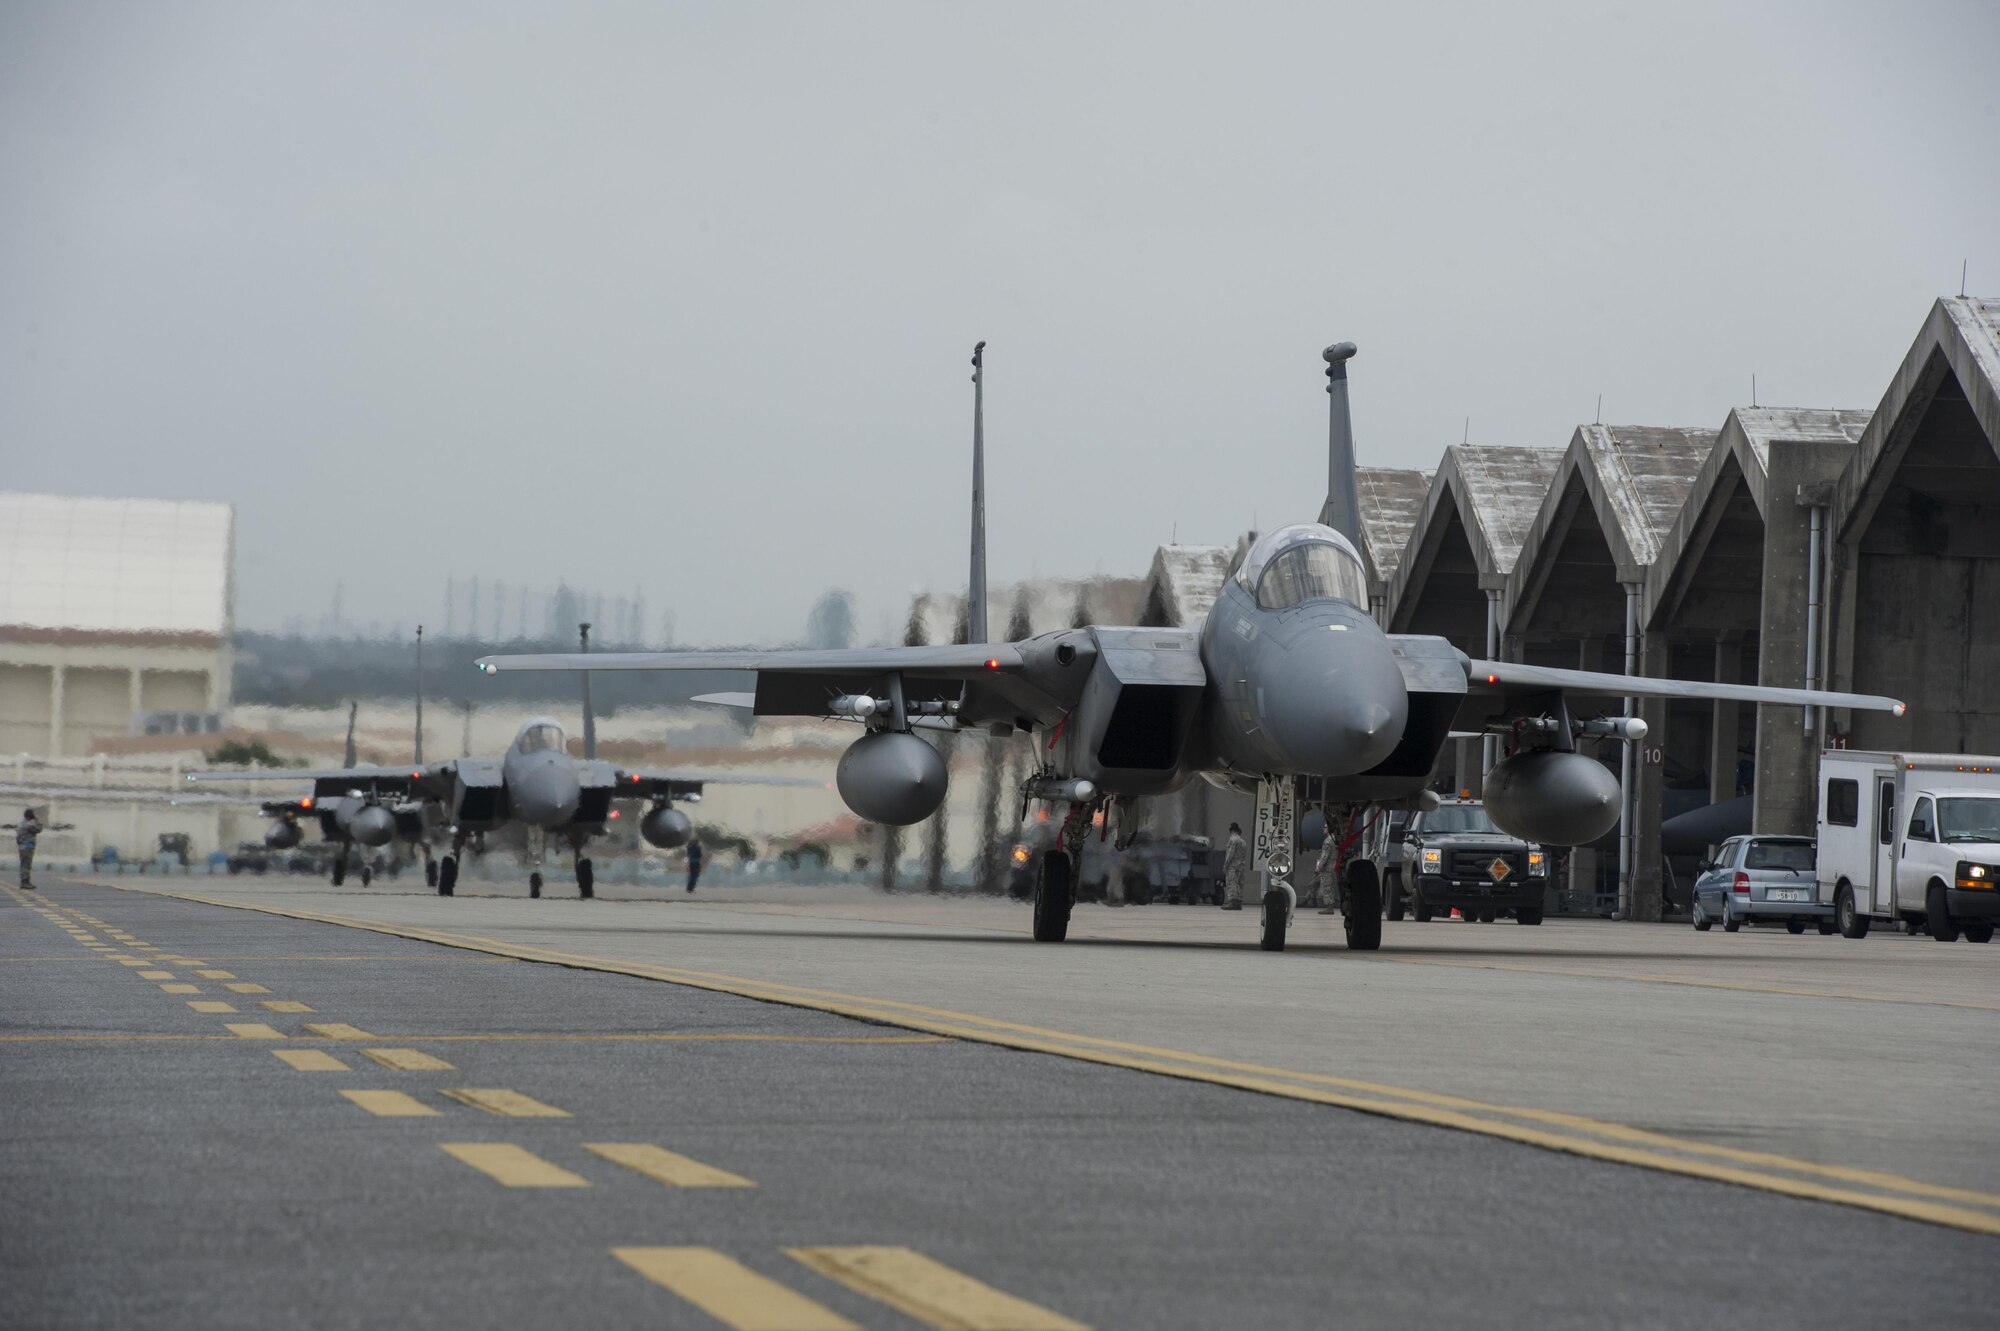 F-15 Eagles from Kadena’s 44th Fighter Squadron taxi down the runway March 18, 2016, at Kadena Air Base, Japan. Members of the 44th FS participated in training to demonstrate Kadena’s air superiority and wartime readiness. (U.S. Air Force photo by Airman 1st Class Lynette M. Rolen) 